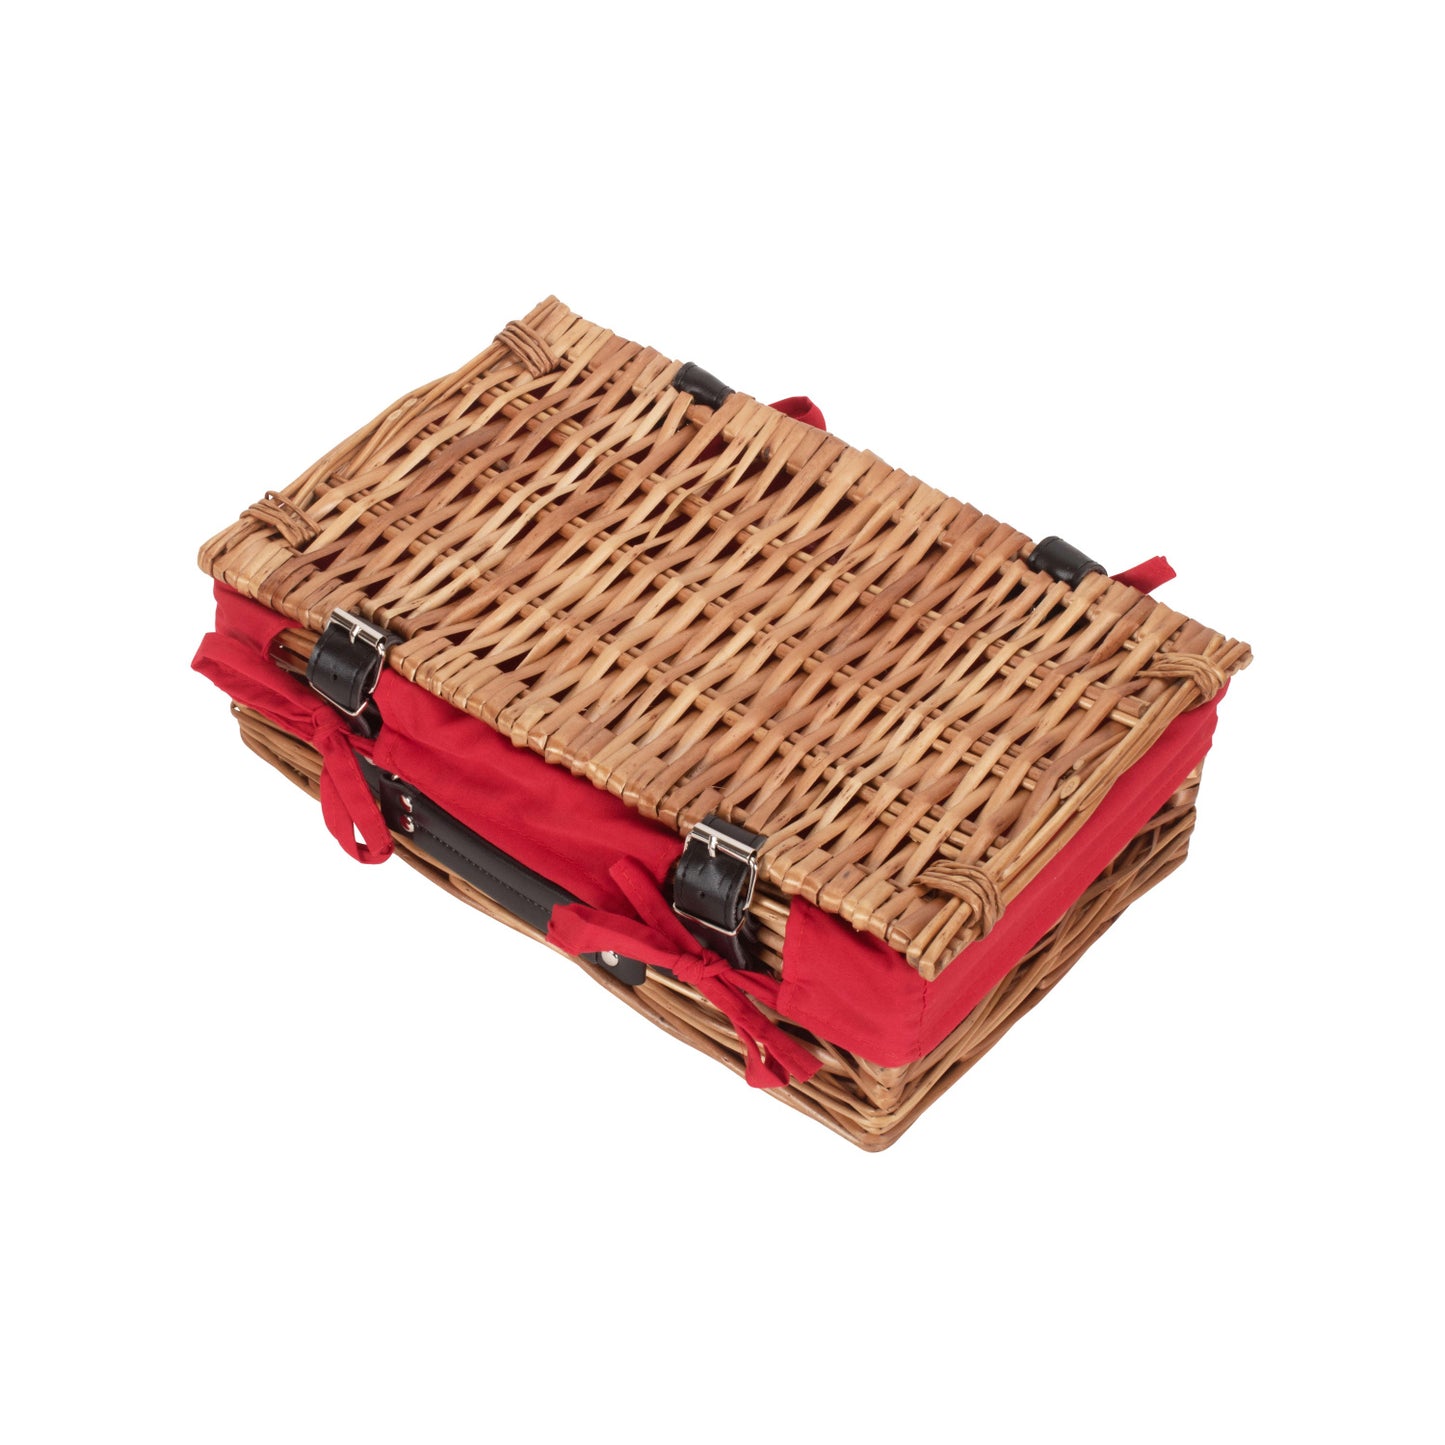 14 Inch Small Packaging Hamper With Red Lining